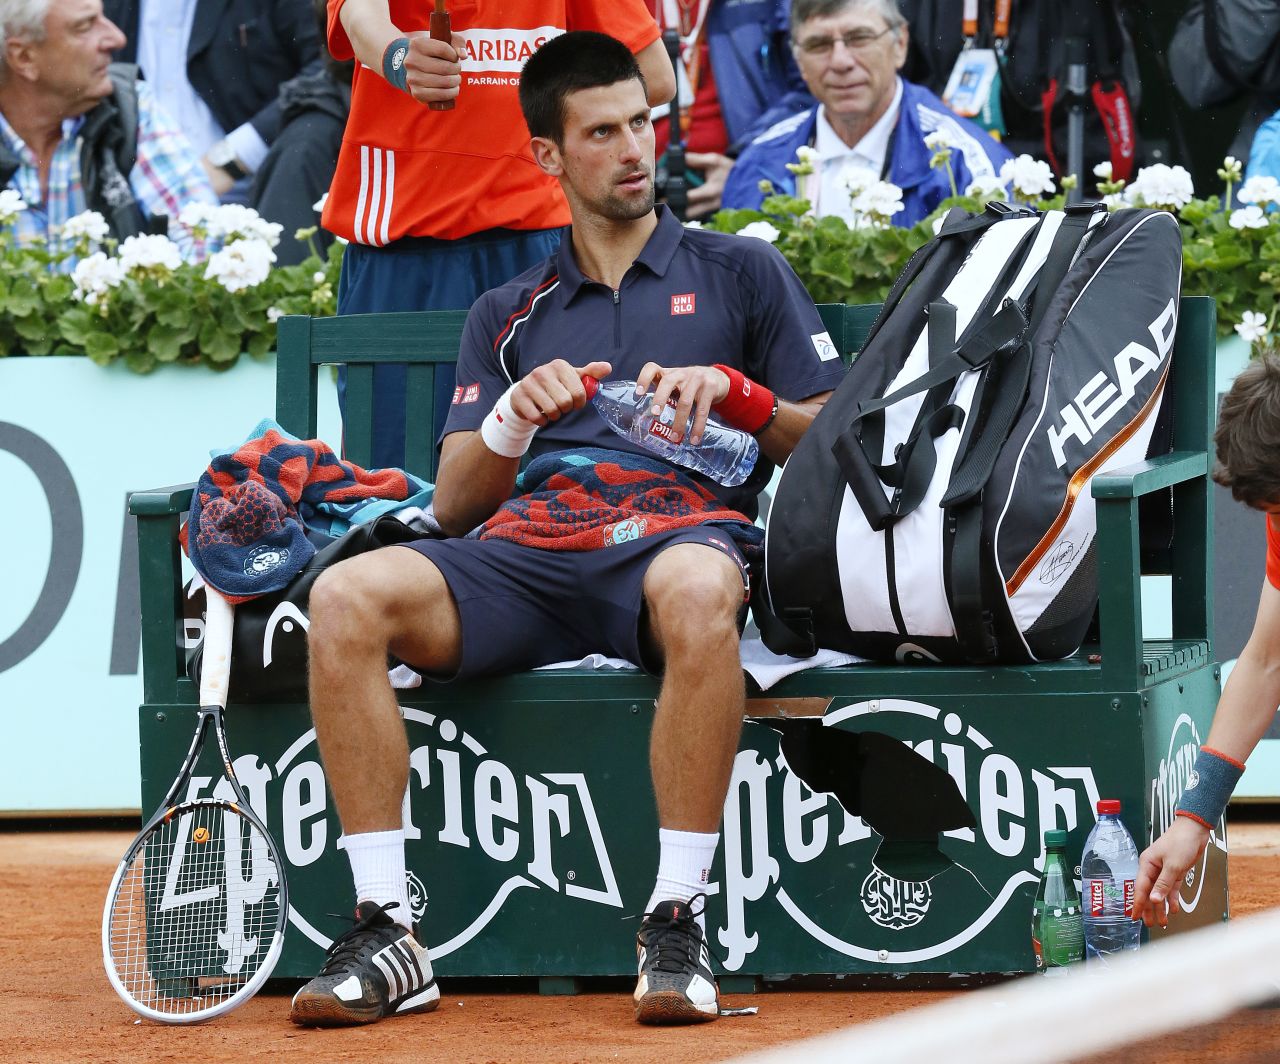 Djokovic suffered an unhappy defeat against Roland Garros king Rafael Nadal in this month's French Open final. The Serbian damaged an advertising board by whacking it with his racket.